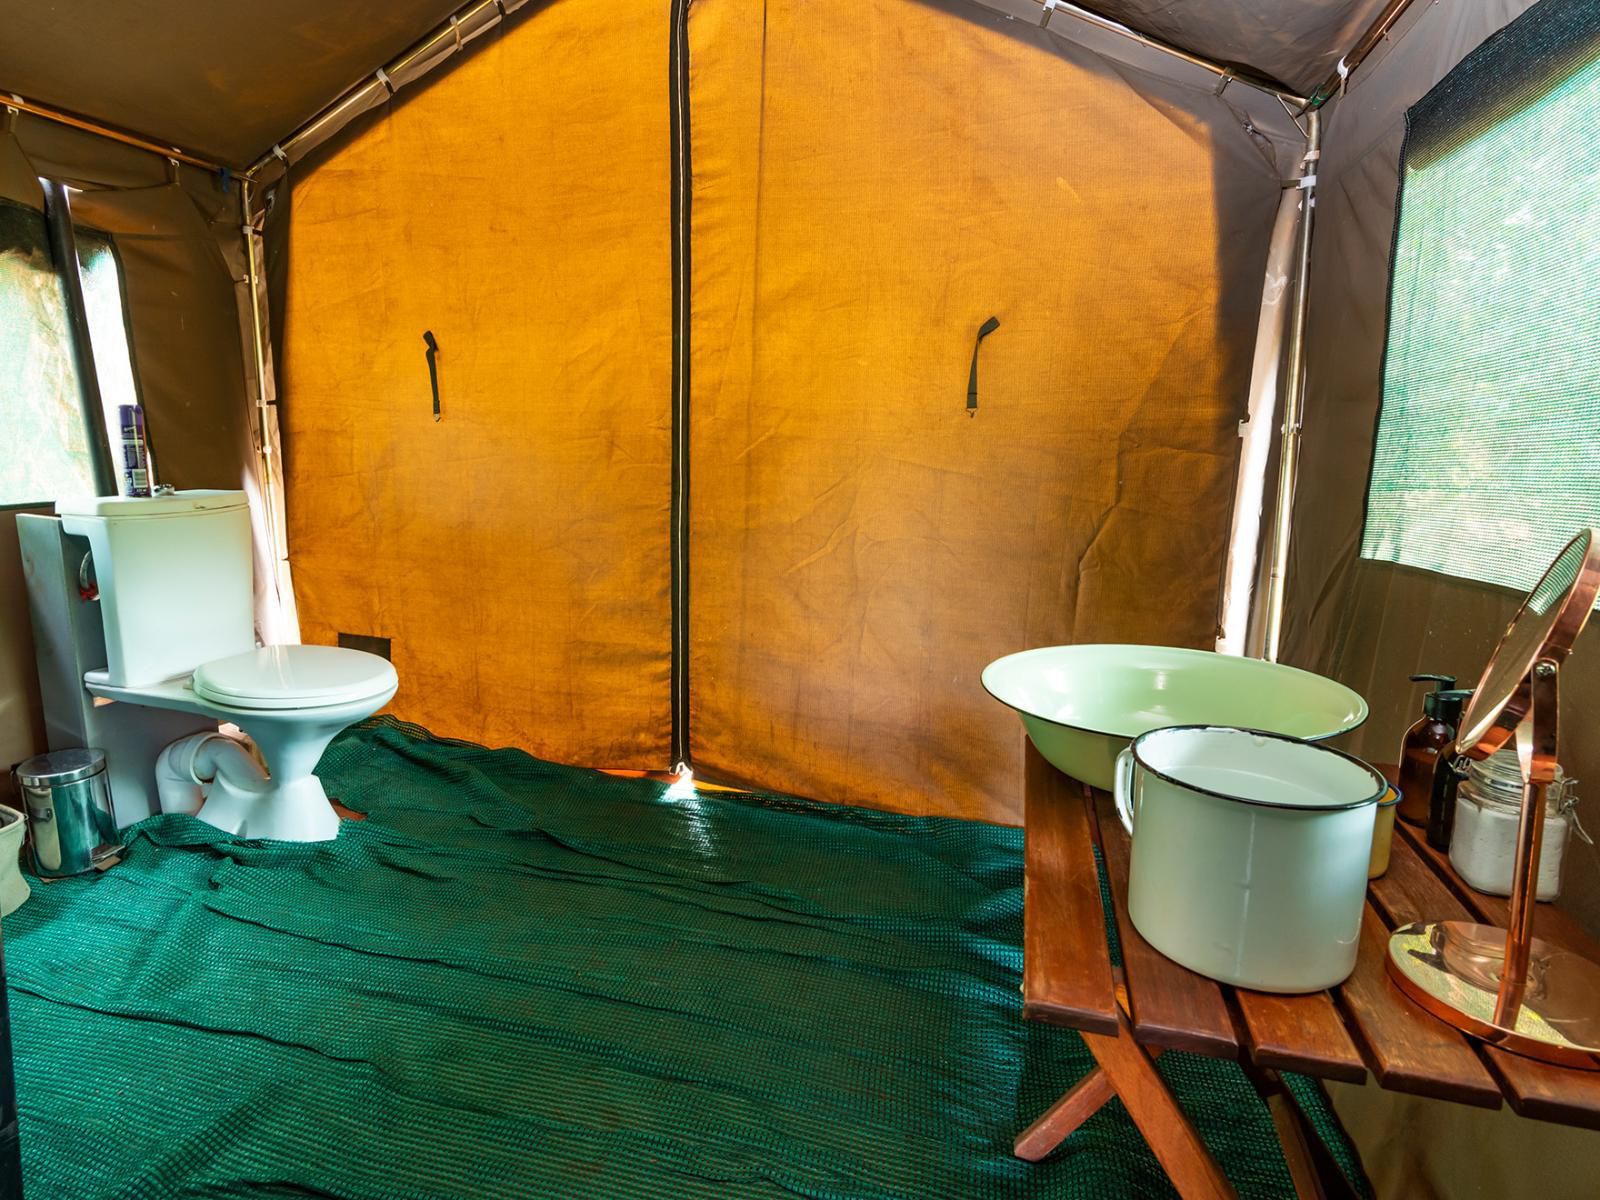 Baobab Hill Bush House North Kruger Park Mpumalanga South Africa Tent, Architecture, Bathroom